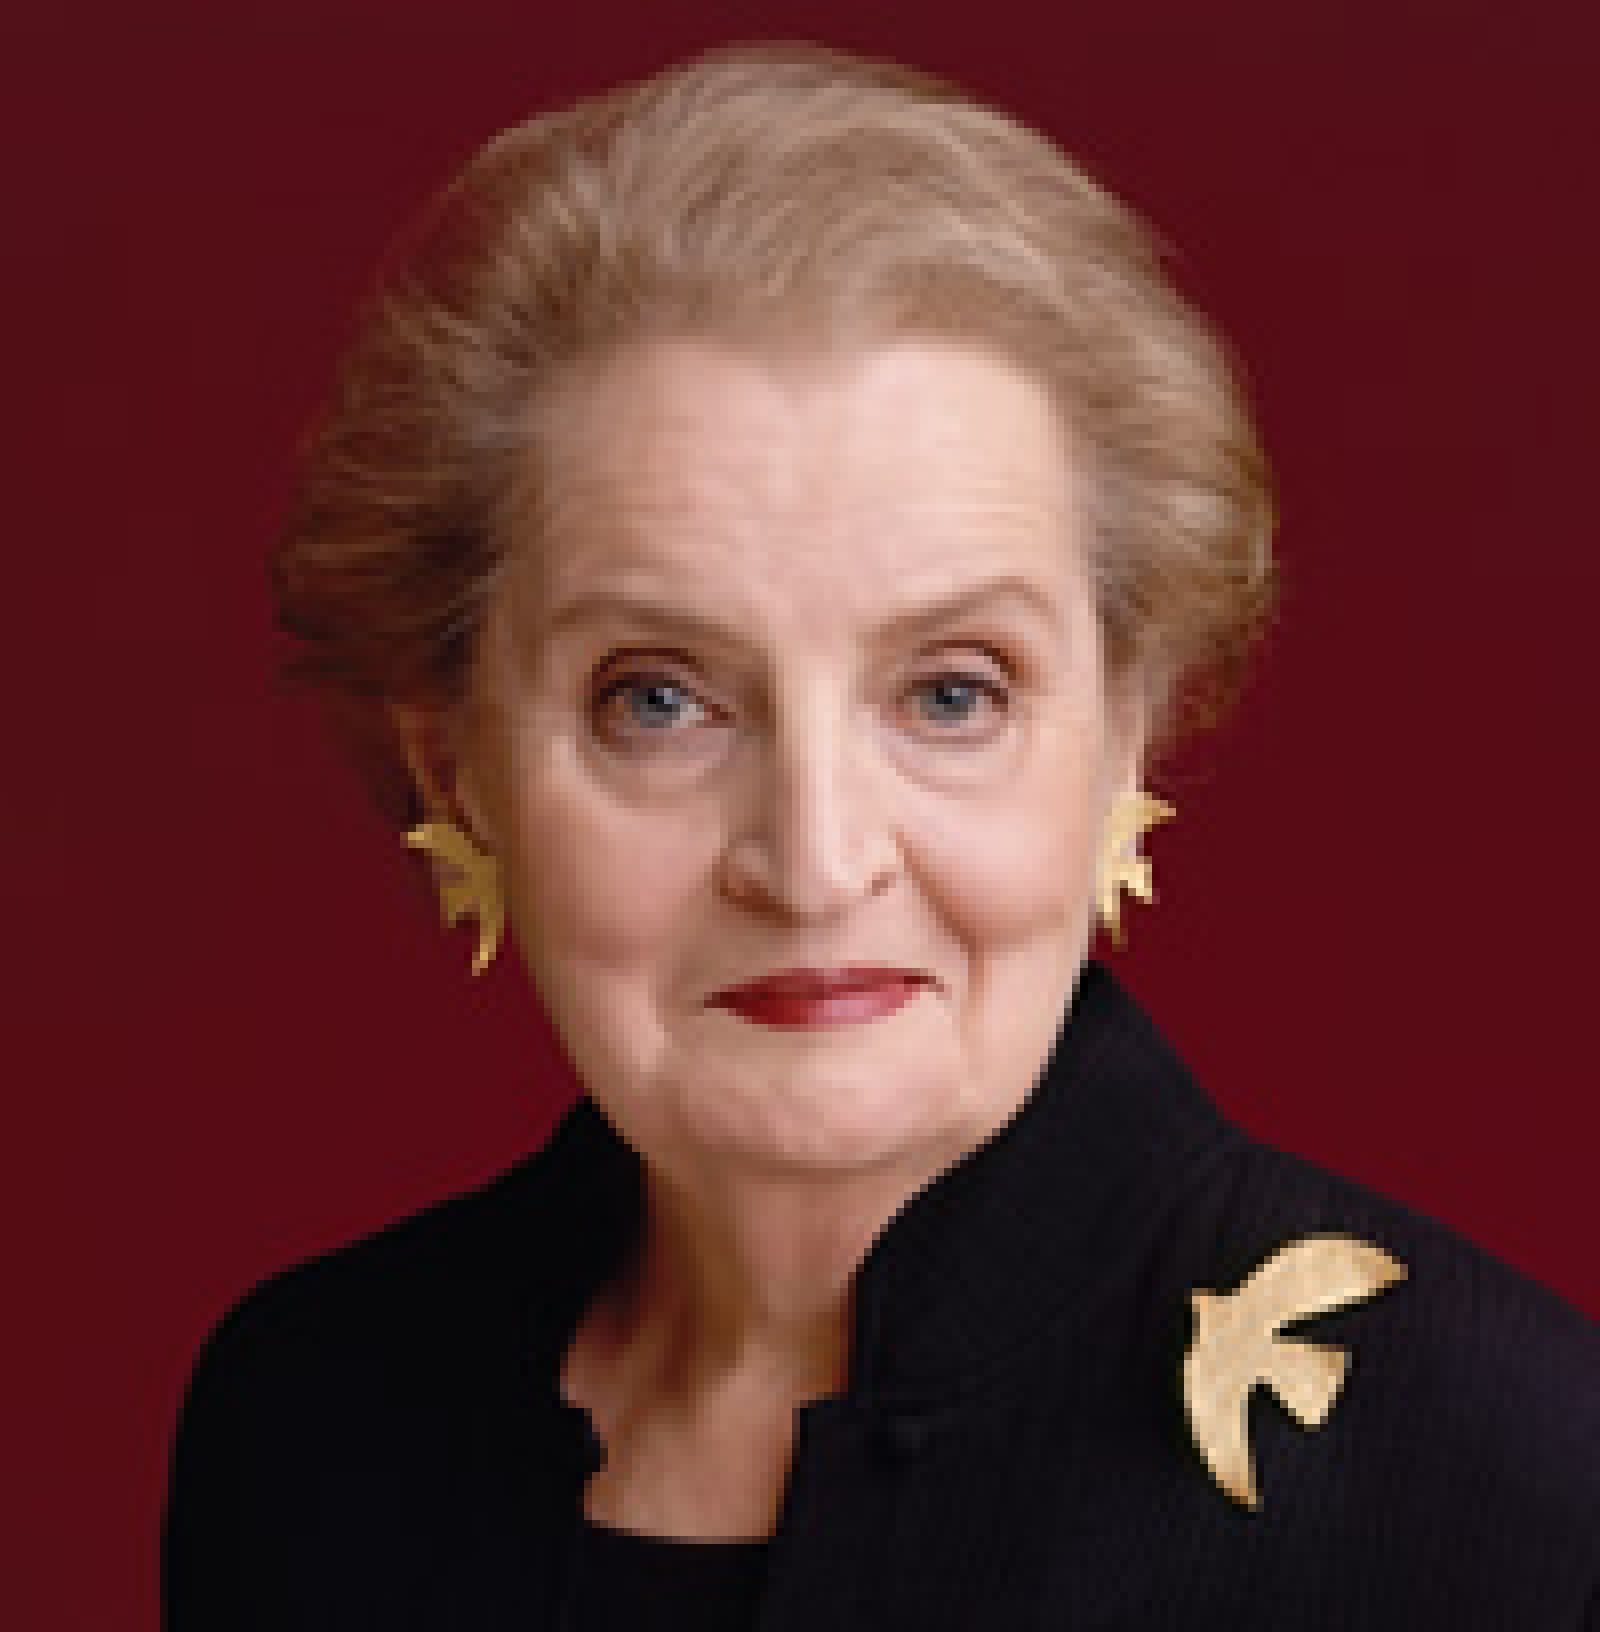 NDI Chairman Albright To Receive Presidential Medal of Freedom